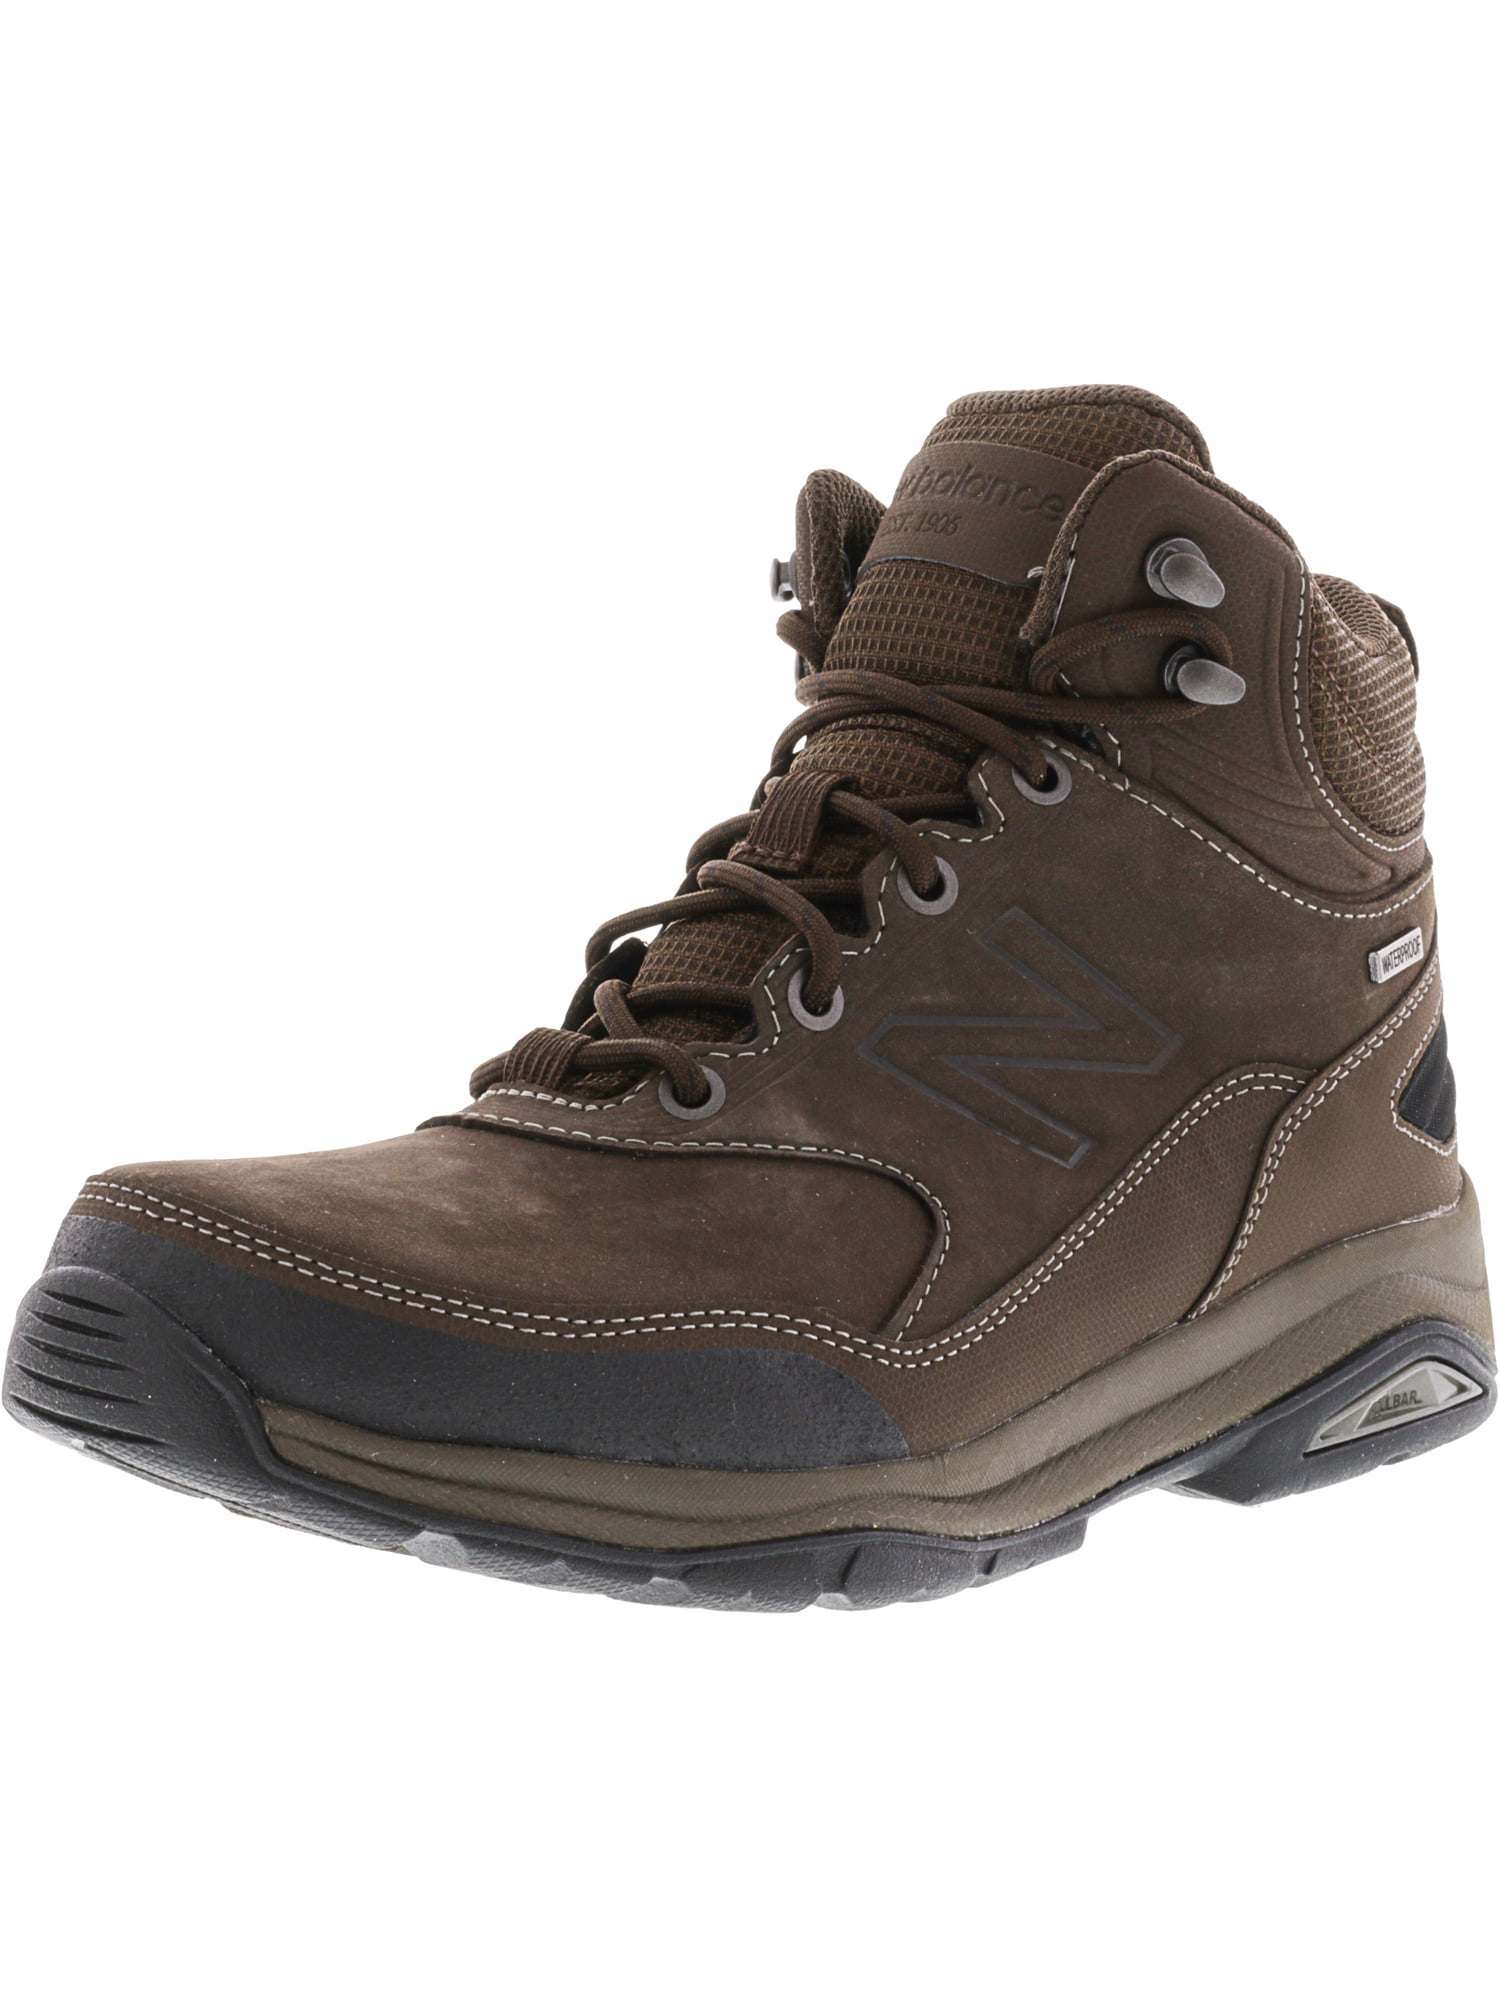 New Balance Men's Mw1400 Gr Ankle-High Leather Backpacking Boot - 7WW